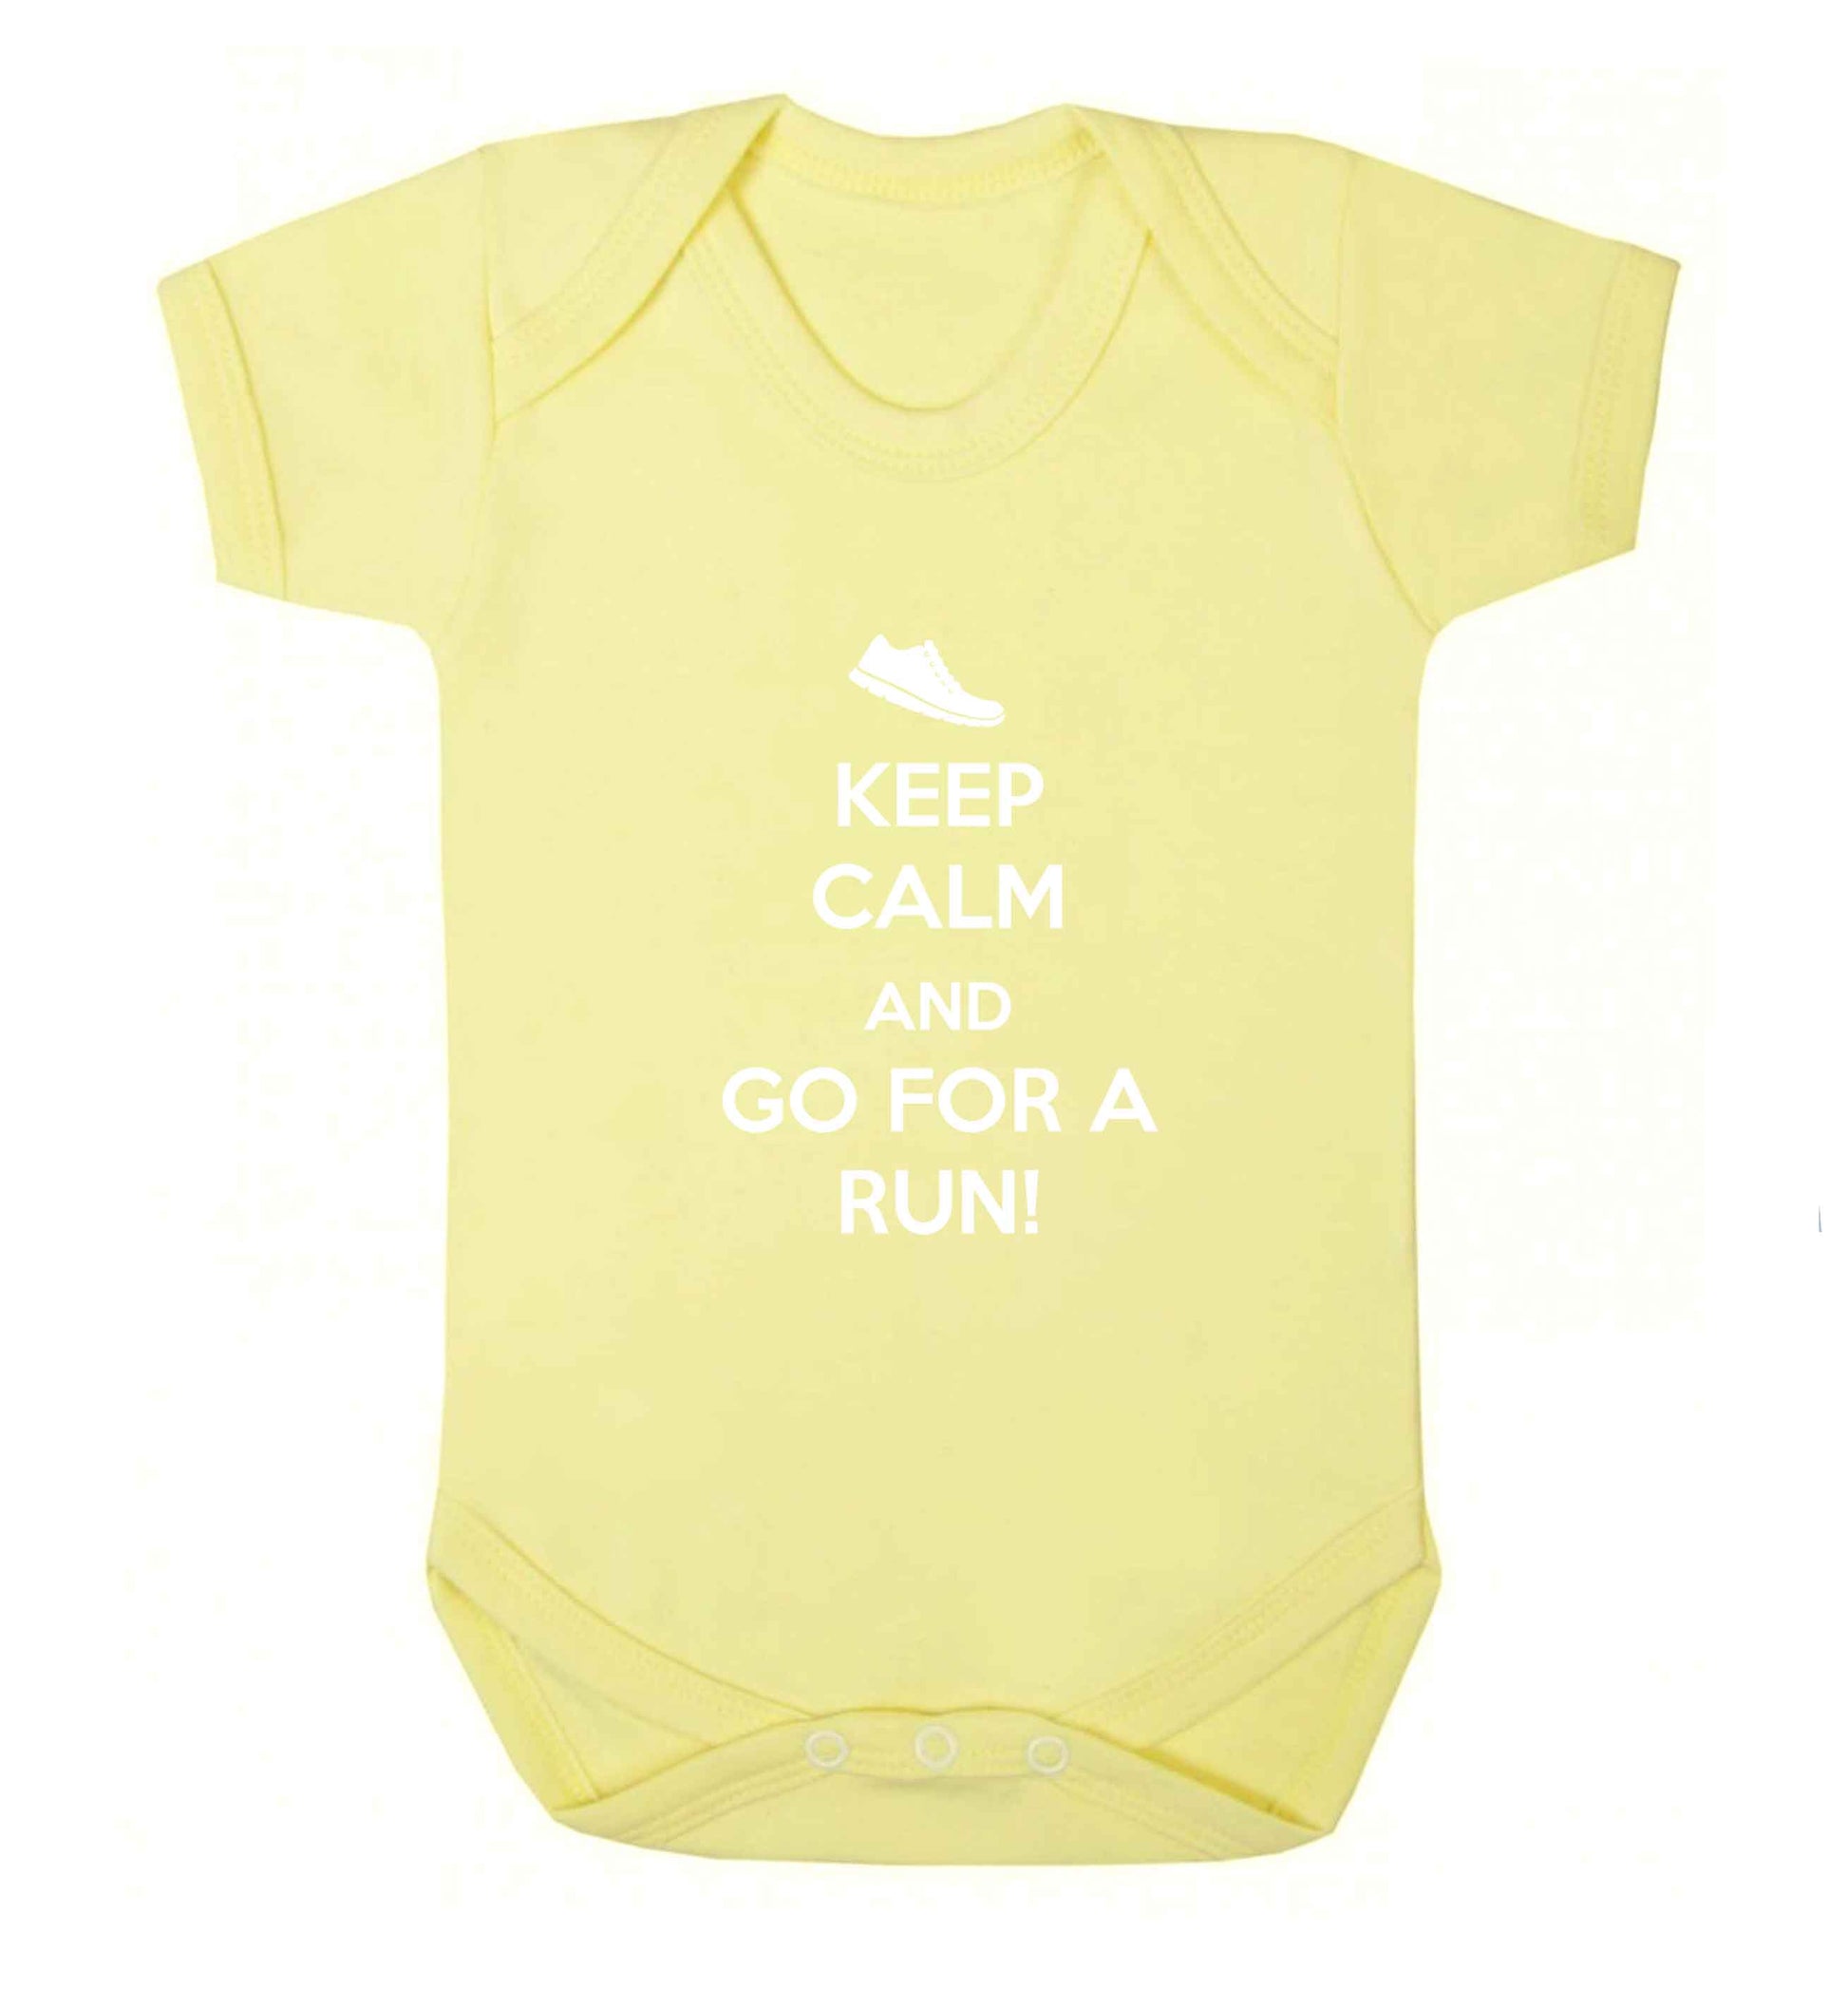 Keep calm and go for a run baby vest pale yellow 18-24 months